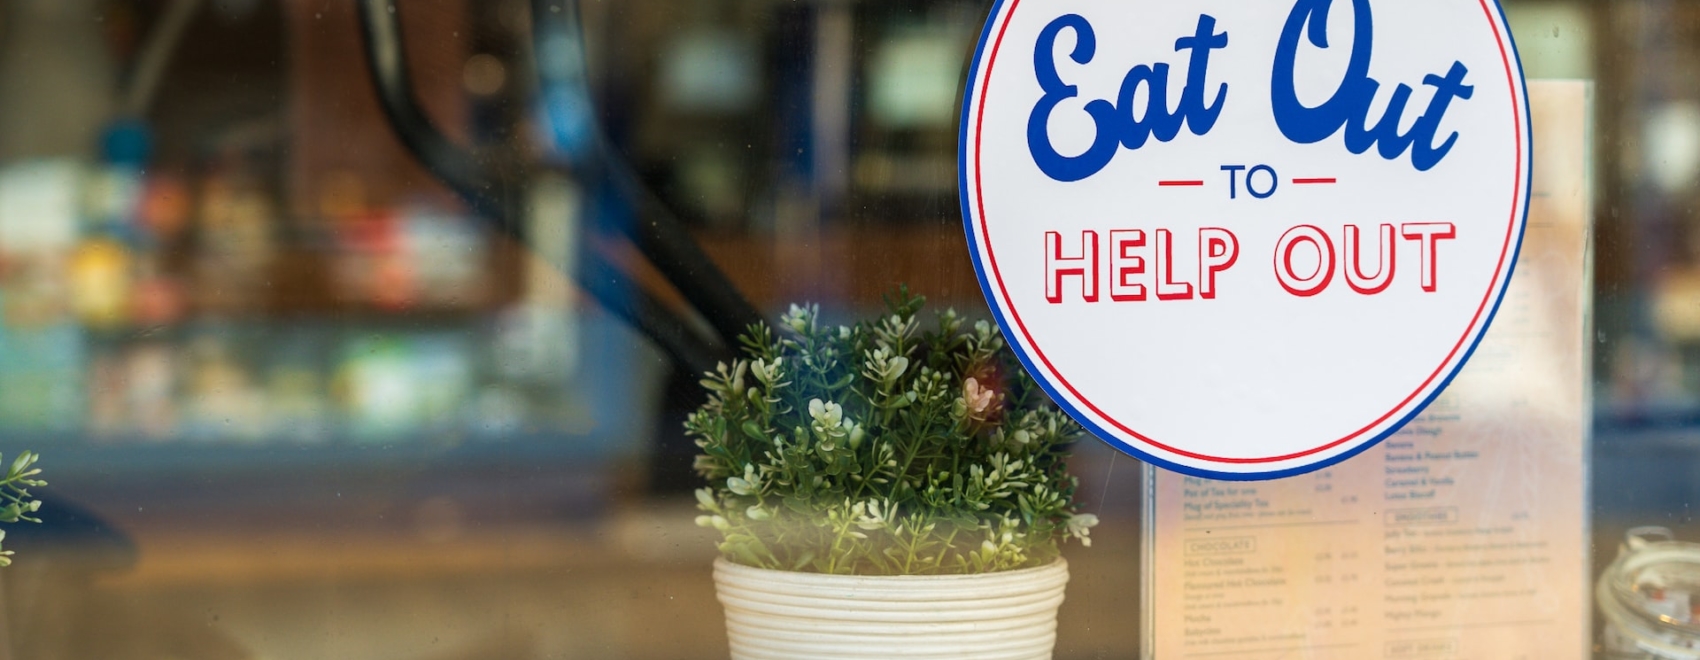 Sticker "Eat out to help out" an Fensterscheibe